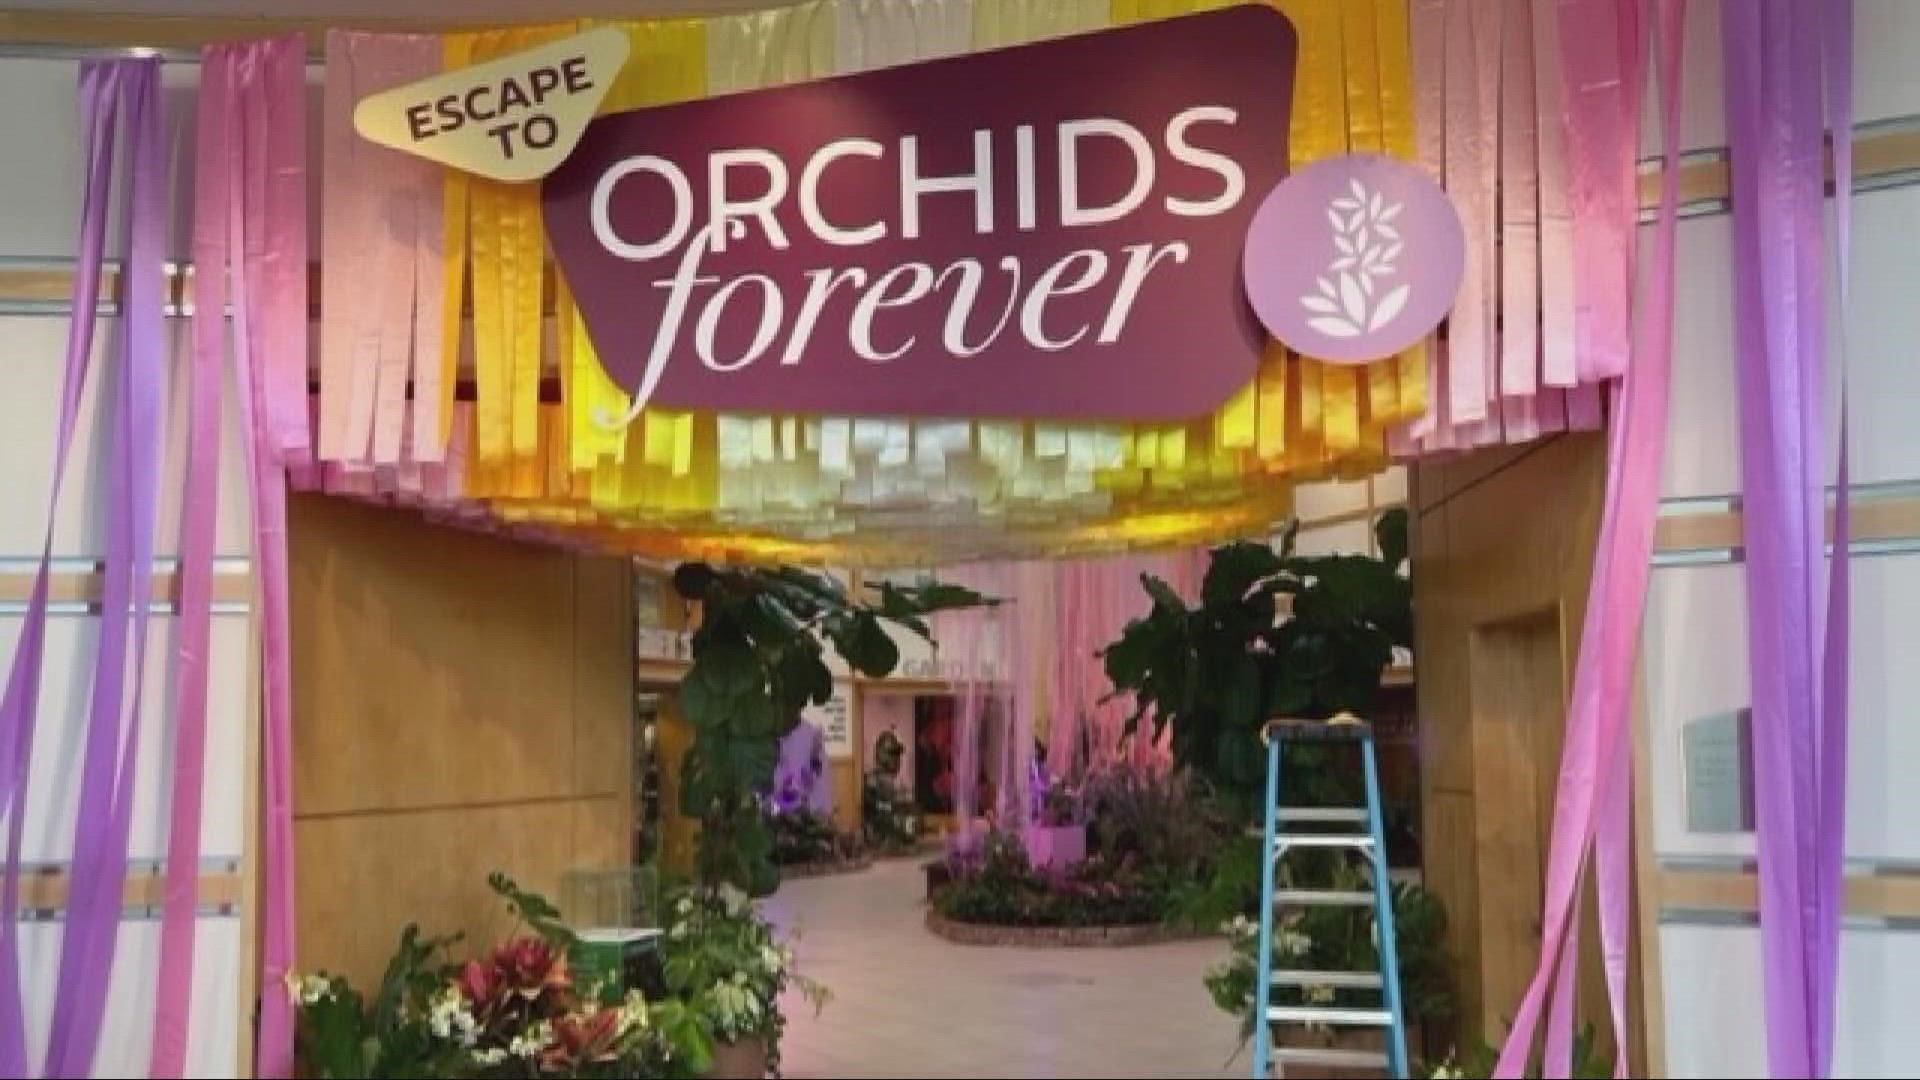 The display of over 100 different types of orchids, and 300 flowers will be open to the public from Saturday, Jan. 28, until Sunday, March 12.